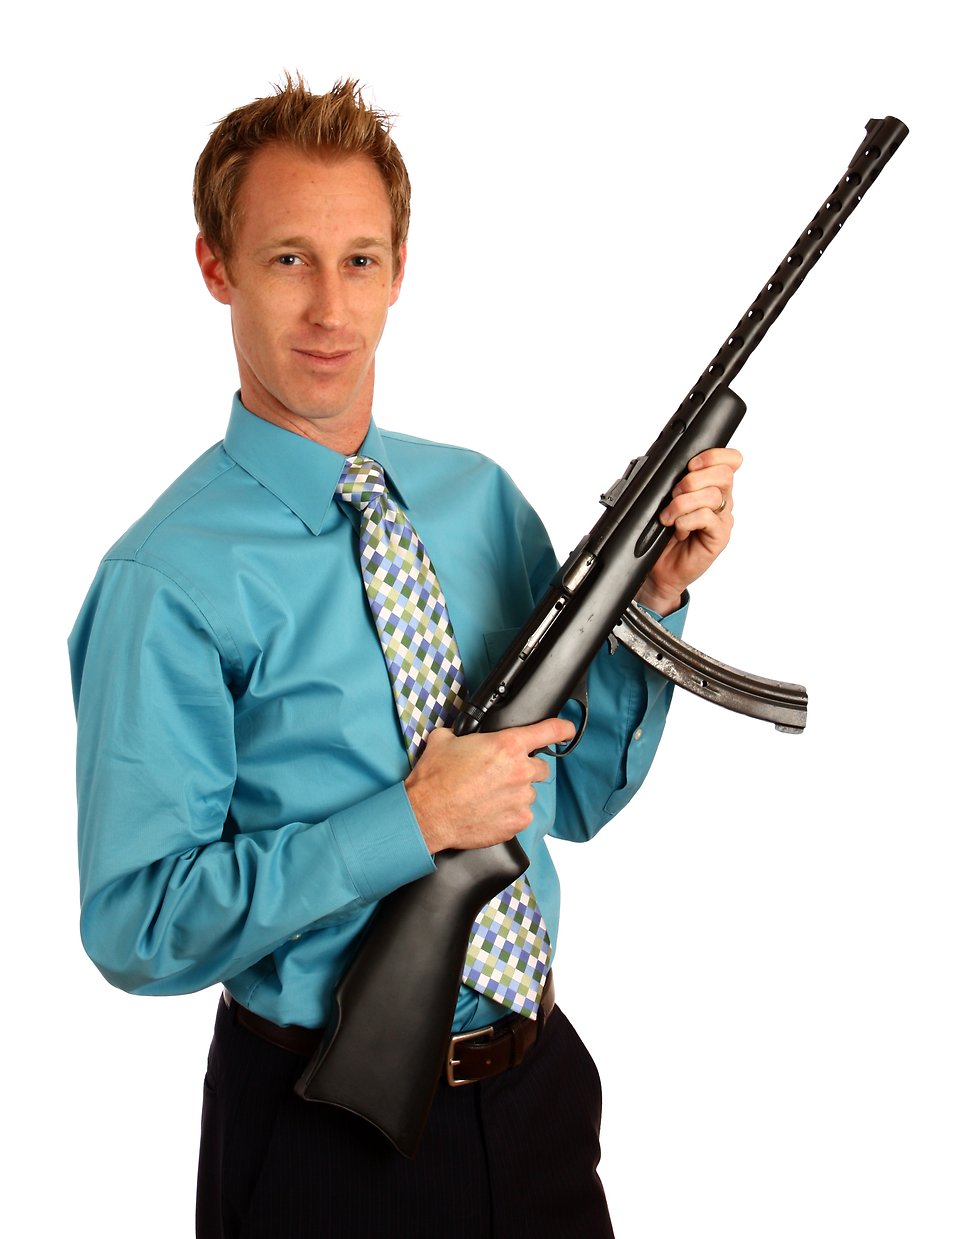 13319-a-young-businessman-holding-a-rifle-pv-3603590377-jpg.443